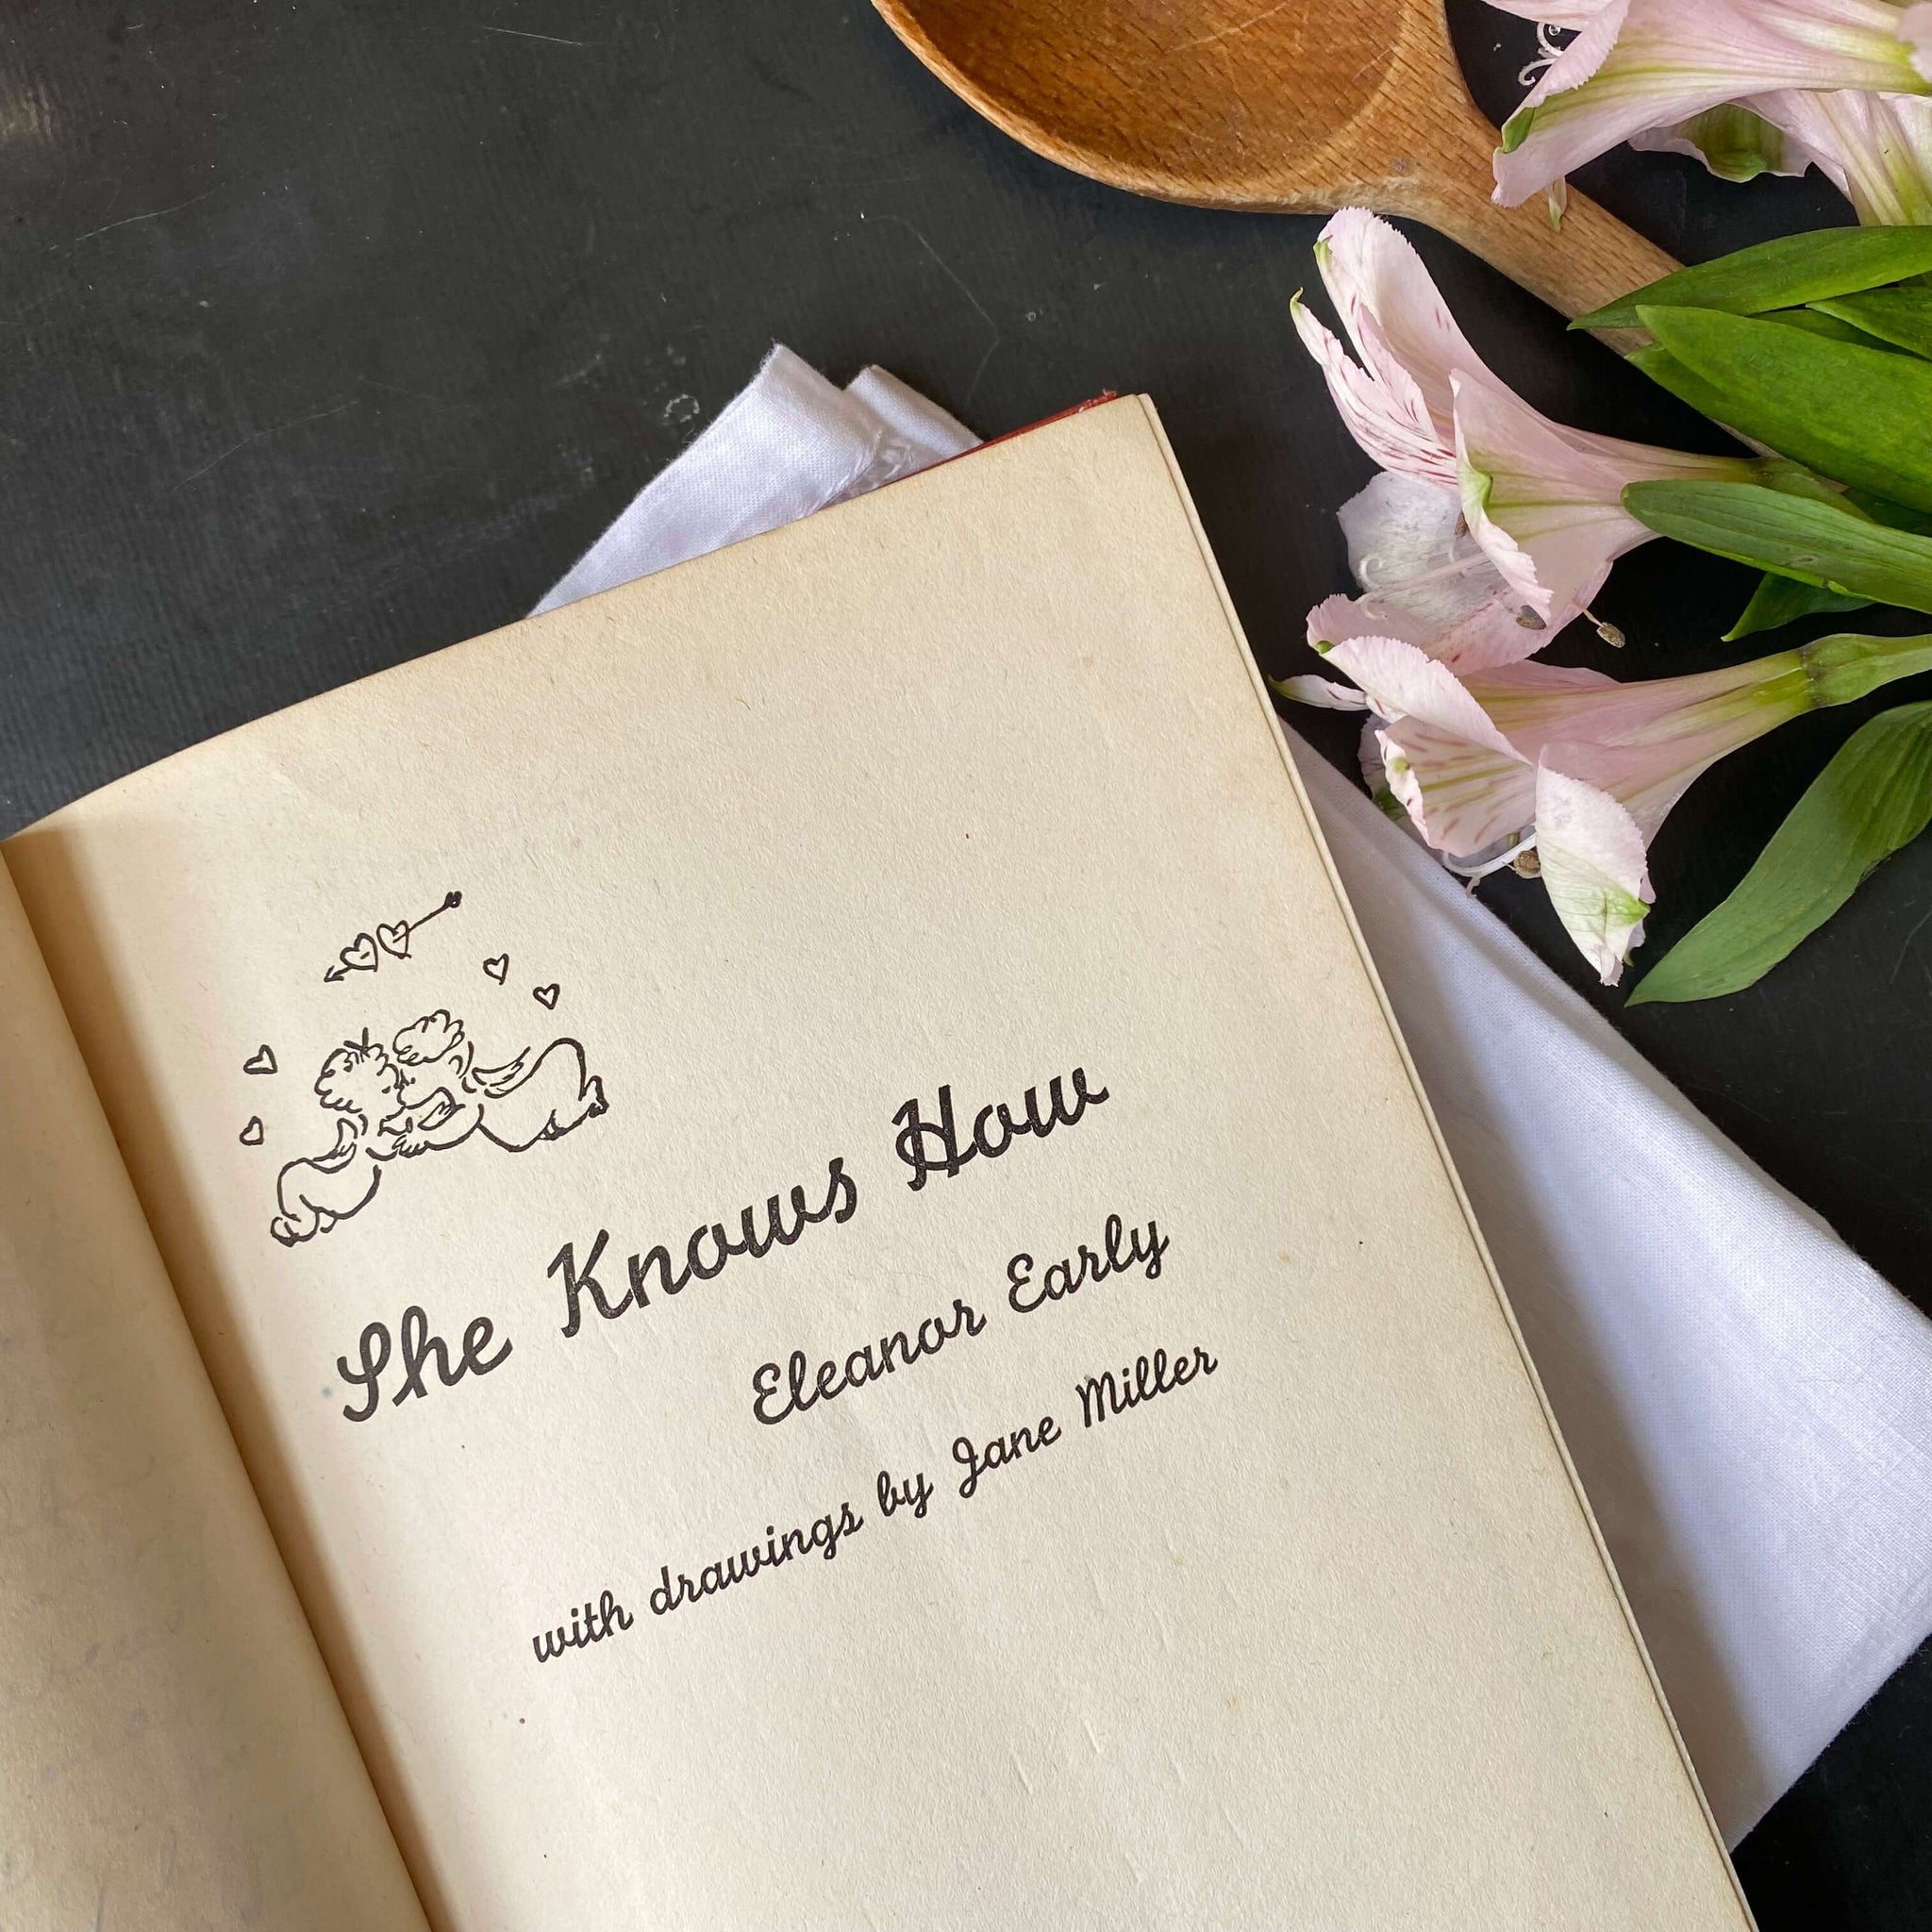 She Knows How by Eleanor Early - 1946 Edition - Rare 1940s Feminine Charm Etiquette Guide & Cookbook